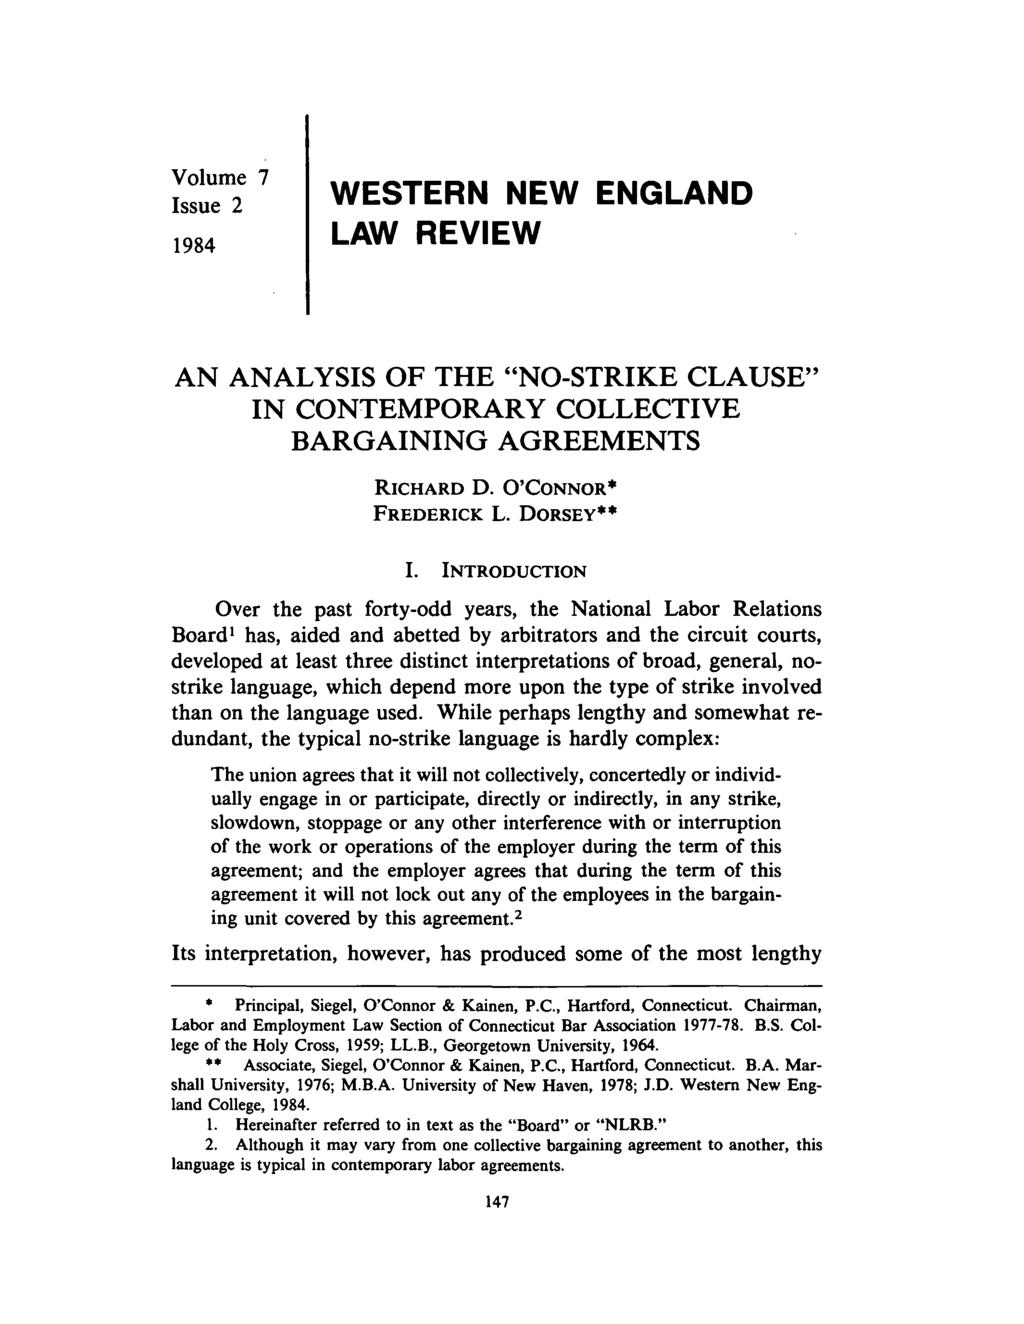 Volume 7 Issue 2 1984 WESTERN NEW ENGLAND LAW REVIEW AN ANALYSIS OF THE "NO-STRIKE CLAUSE" IN CONTEMPORARY COLLECTIVE BARGAINING AGREEMENTS RICHARD D. O'CONNOR FREDERICK L. DORSEY I.